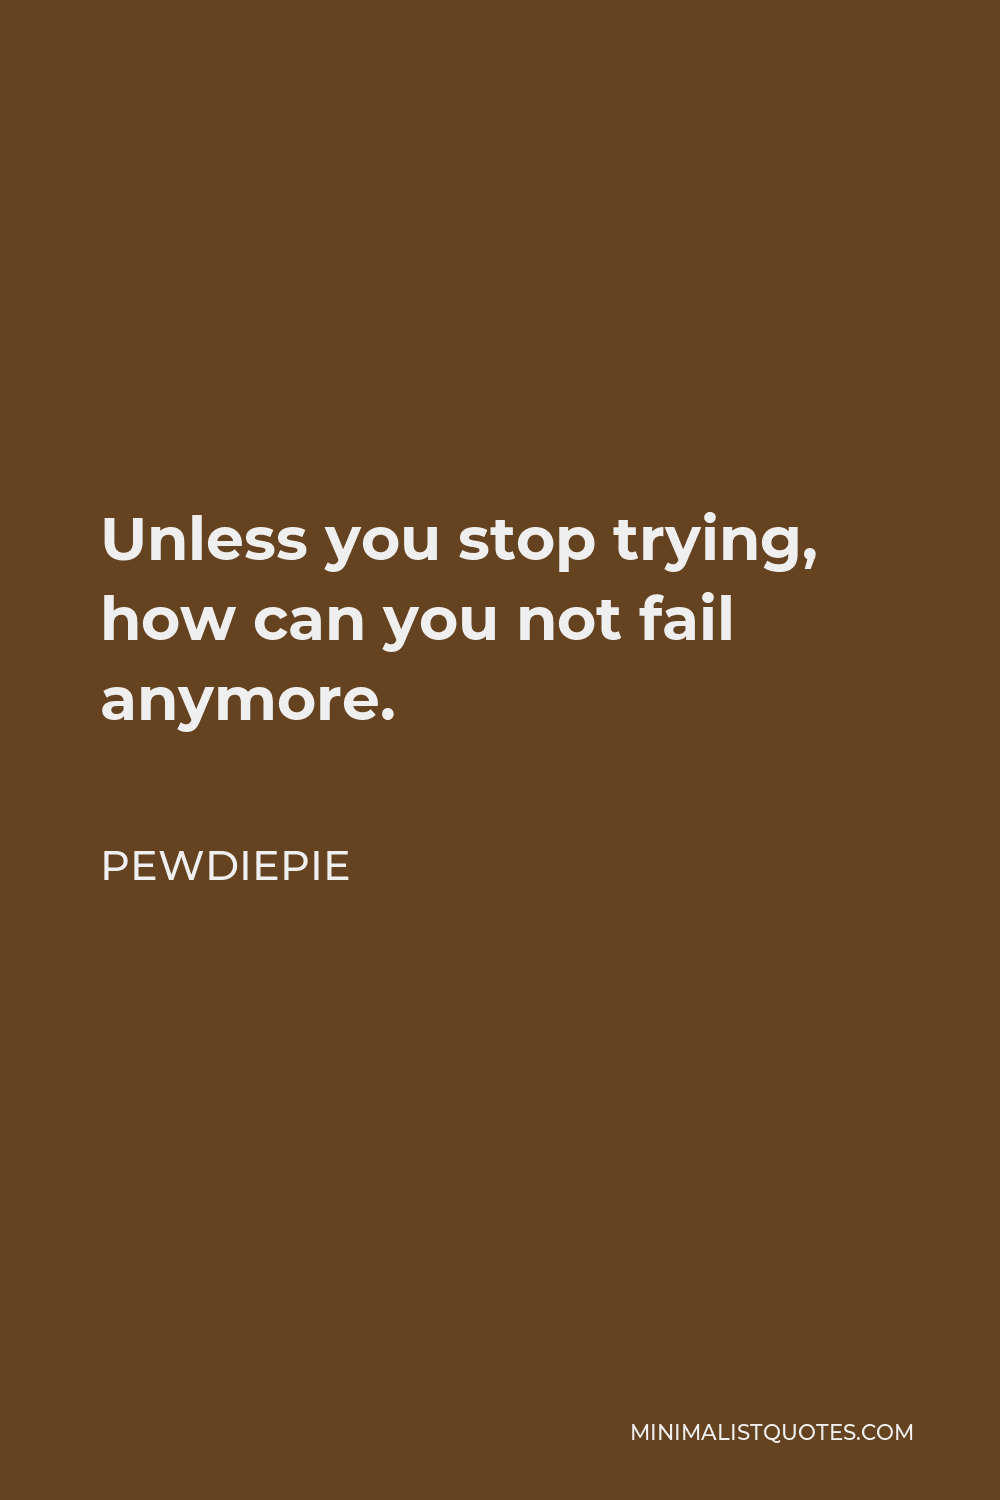 PewDiePie Quote - Unless you stop trying, how can you not fail anymore.